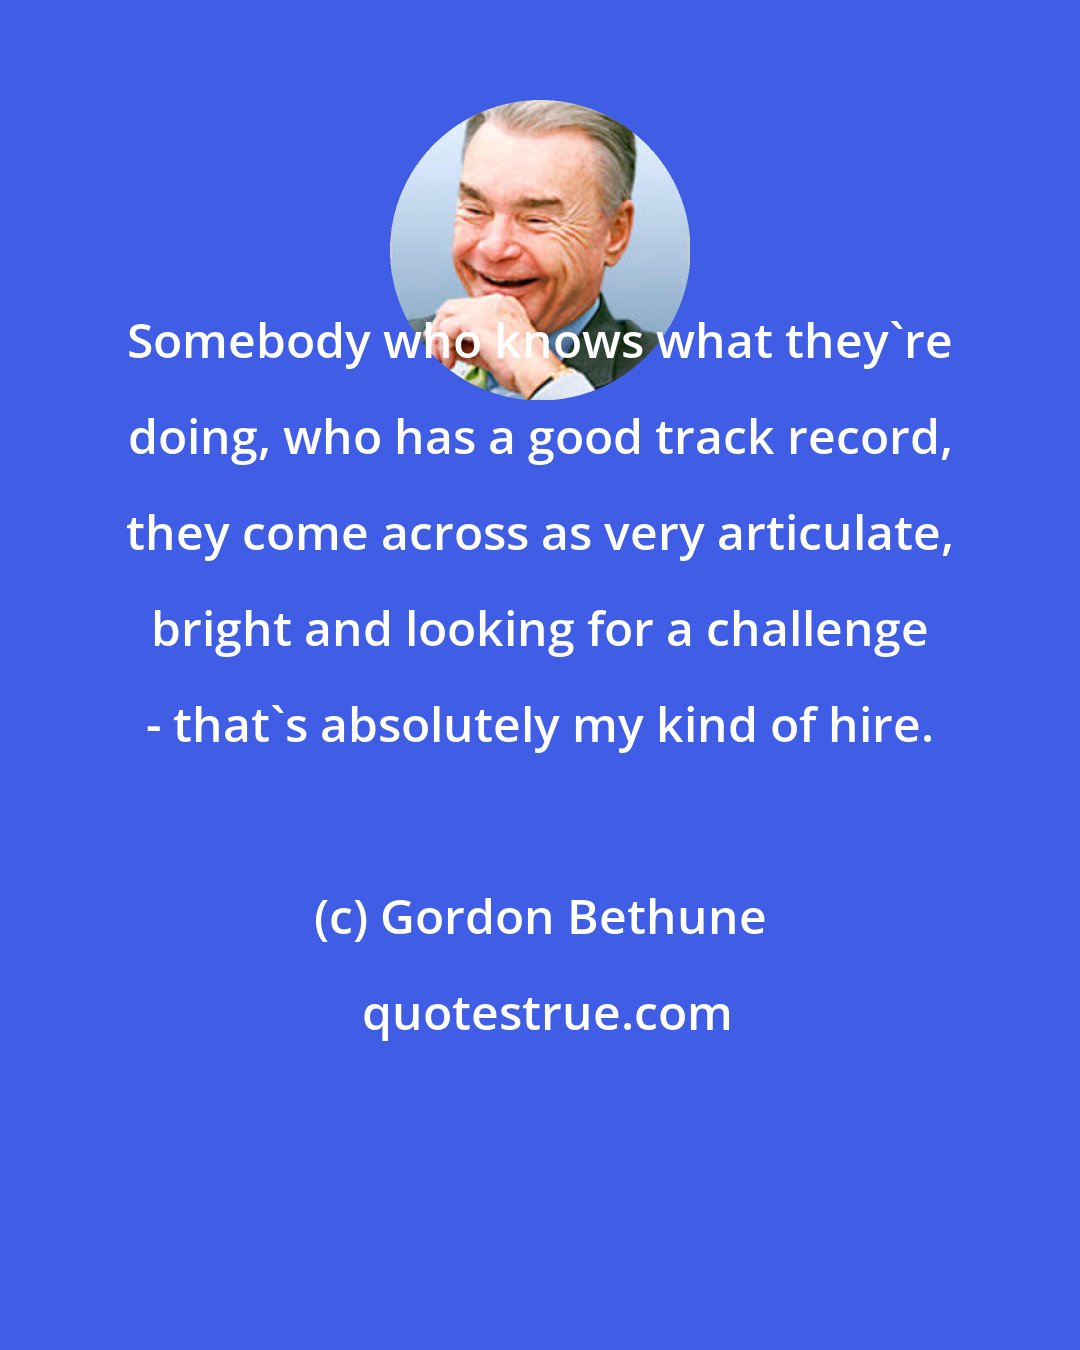 Gordon Bethune: Somebody who knows what they're doing, who has a good track record, they come across as very articulate, bright and looking for a challenge - that's absolutely my kind of hire.